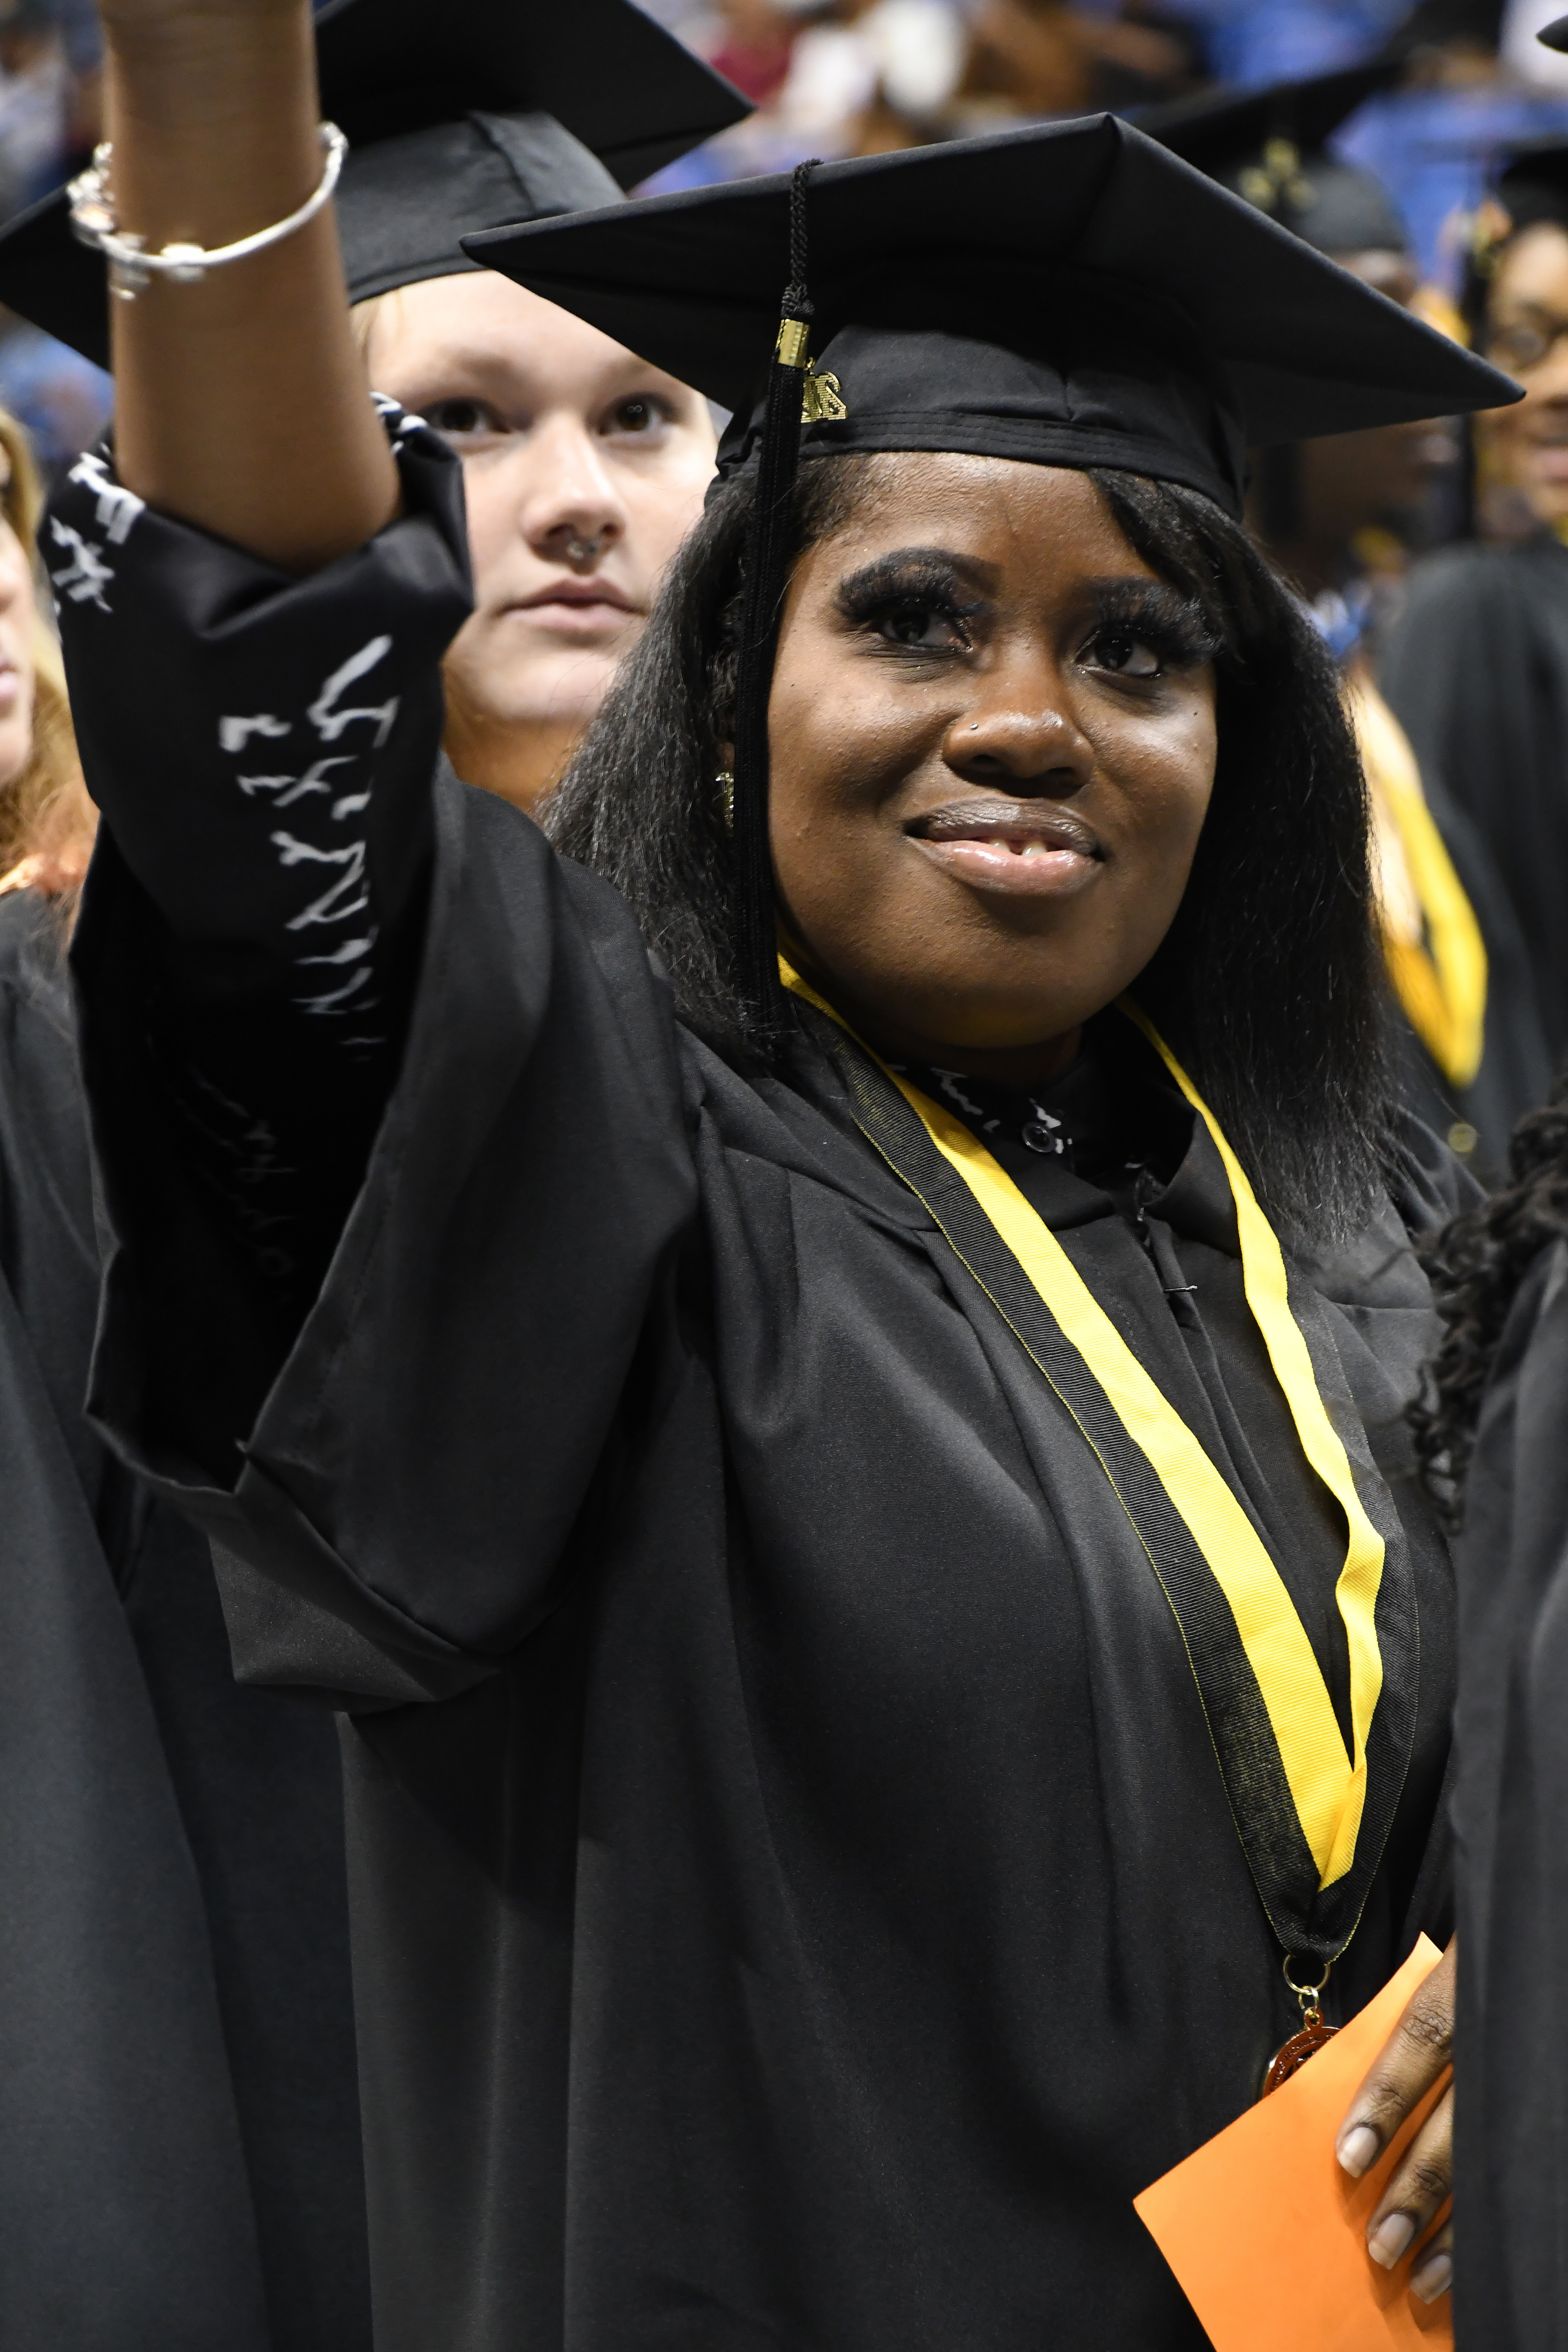 A close-up photo of a graduate smiling and raising her arm to wave to the crowd.